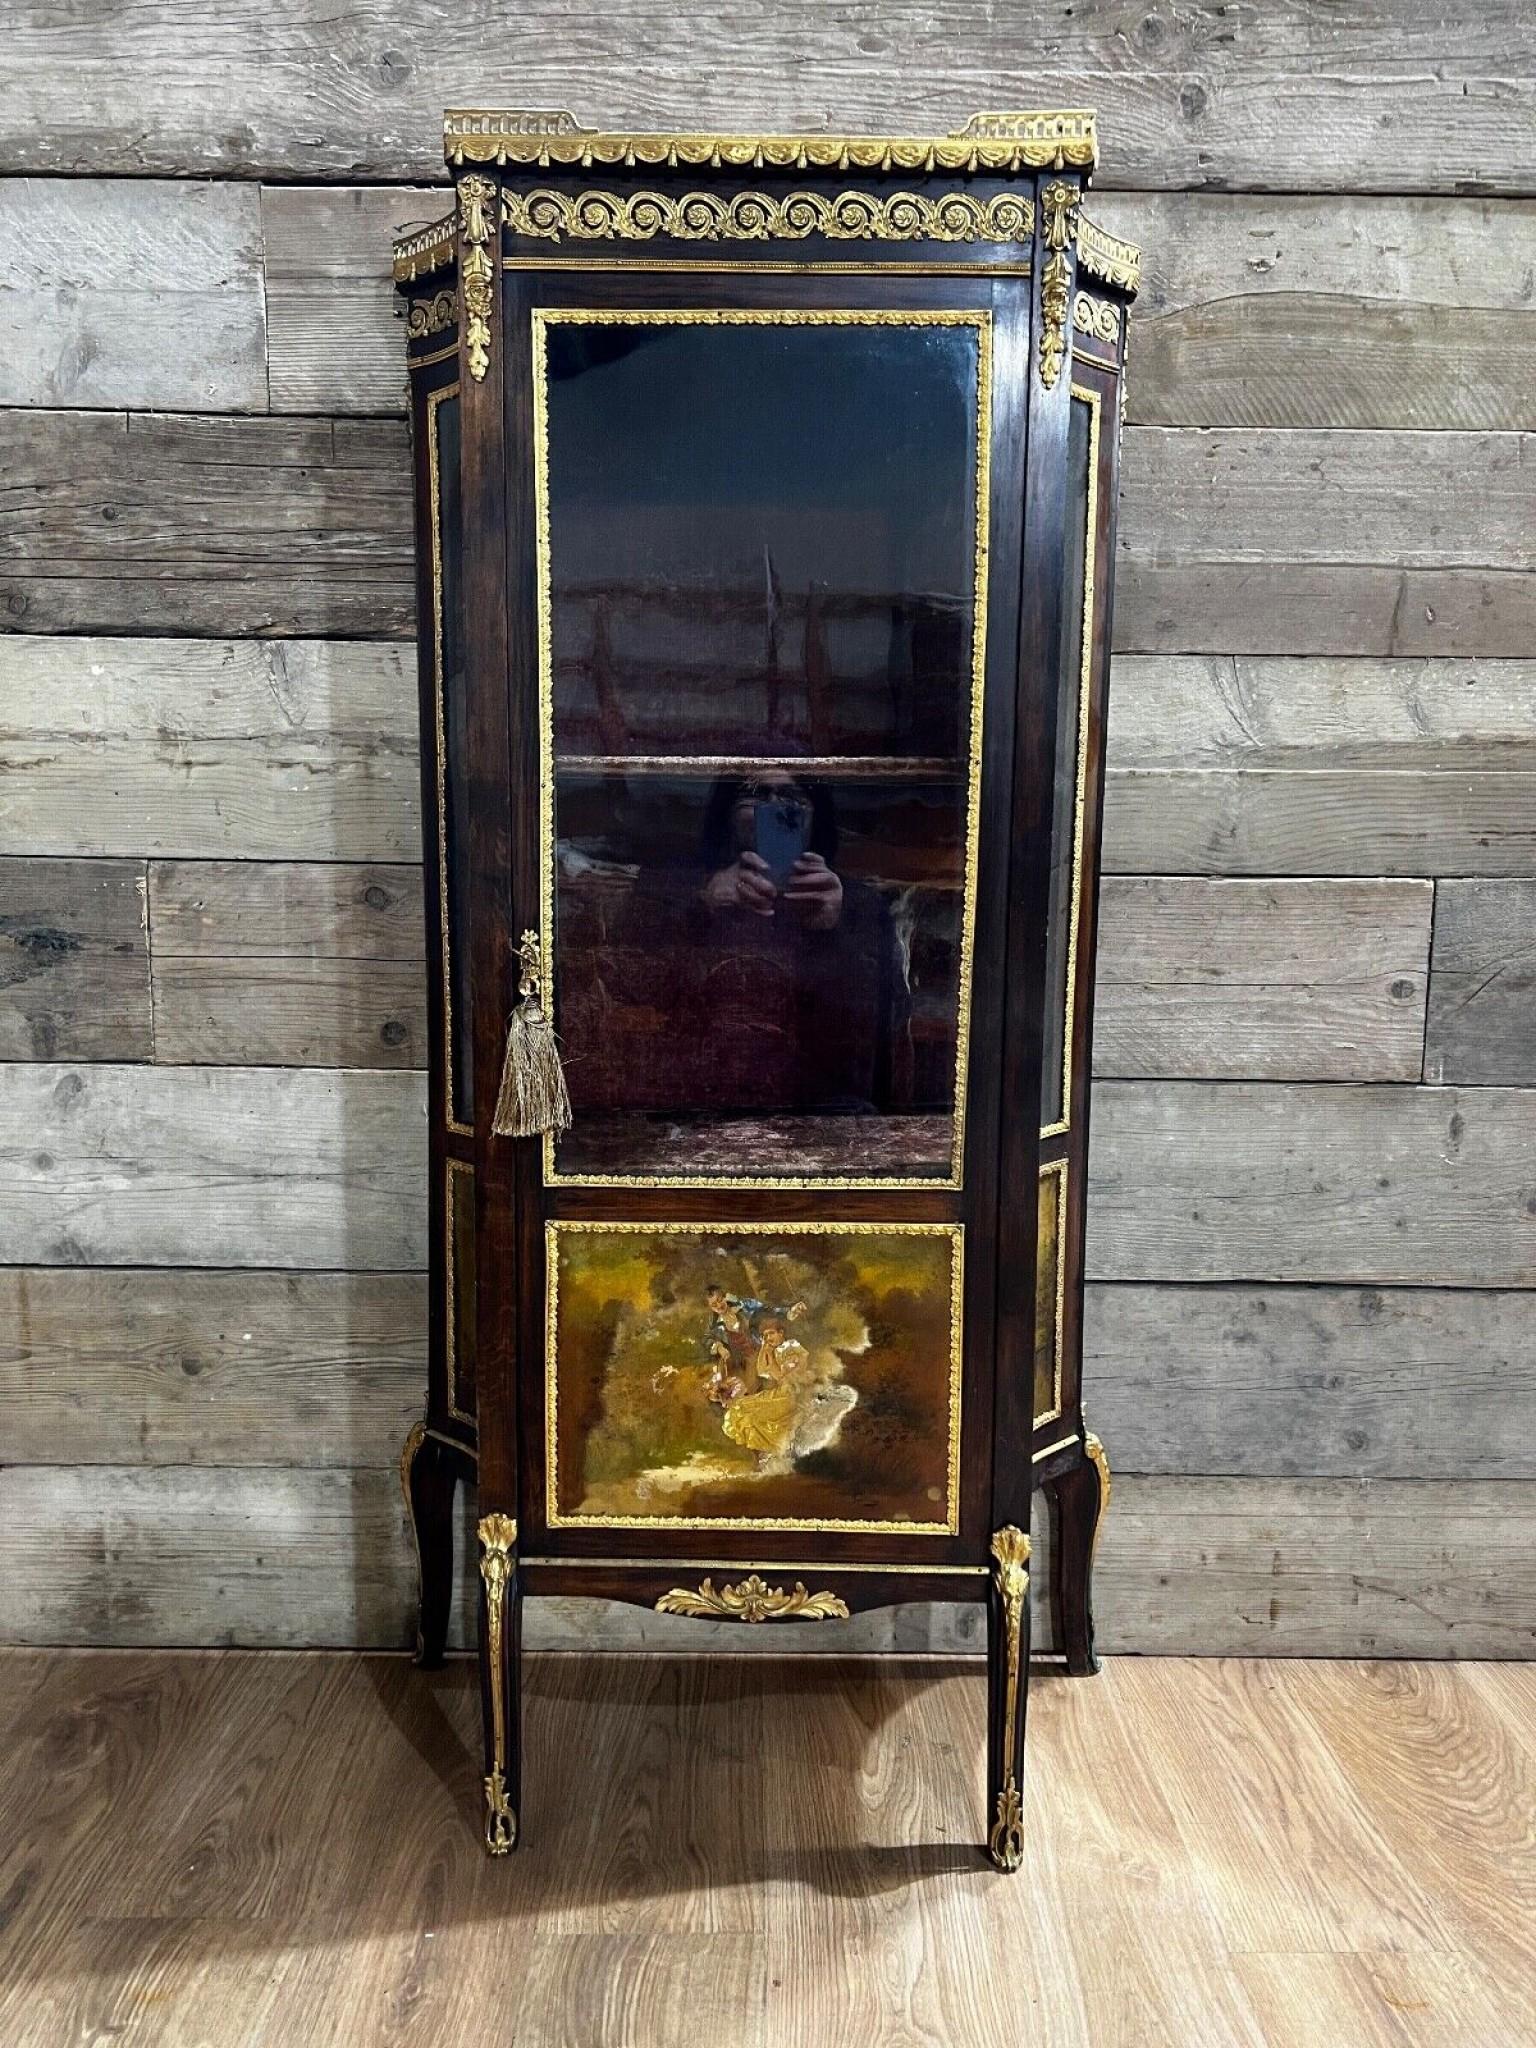 Gorgeous French vitrine with painted panels in the Vernis Martin manner
Circa 1880 on this gorgeous display cabinet with original ormolu mounts
Bought from a dealer on Marche Biron at the Paris antiques market
Hand painted designs feature Romantic